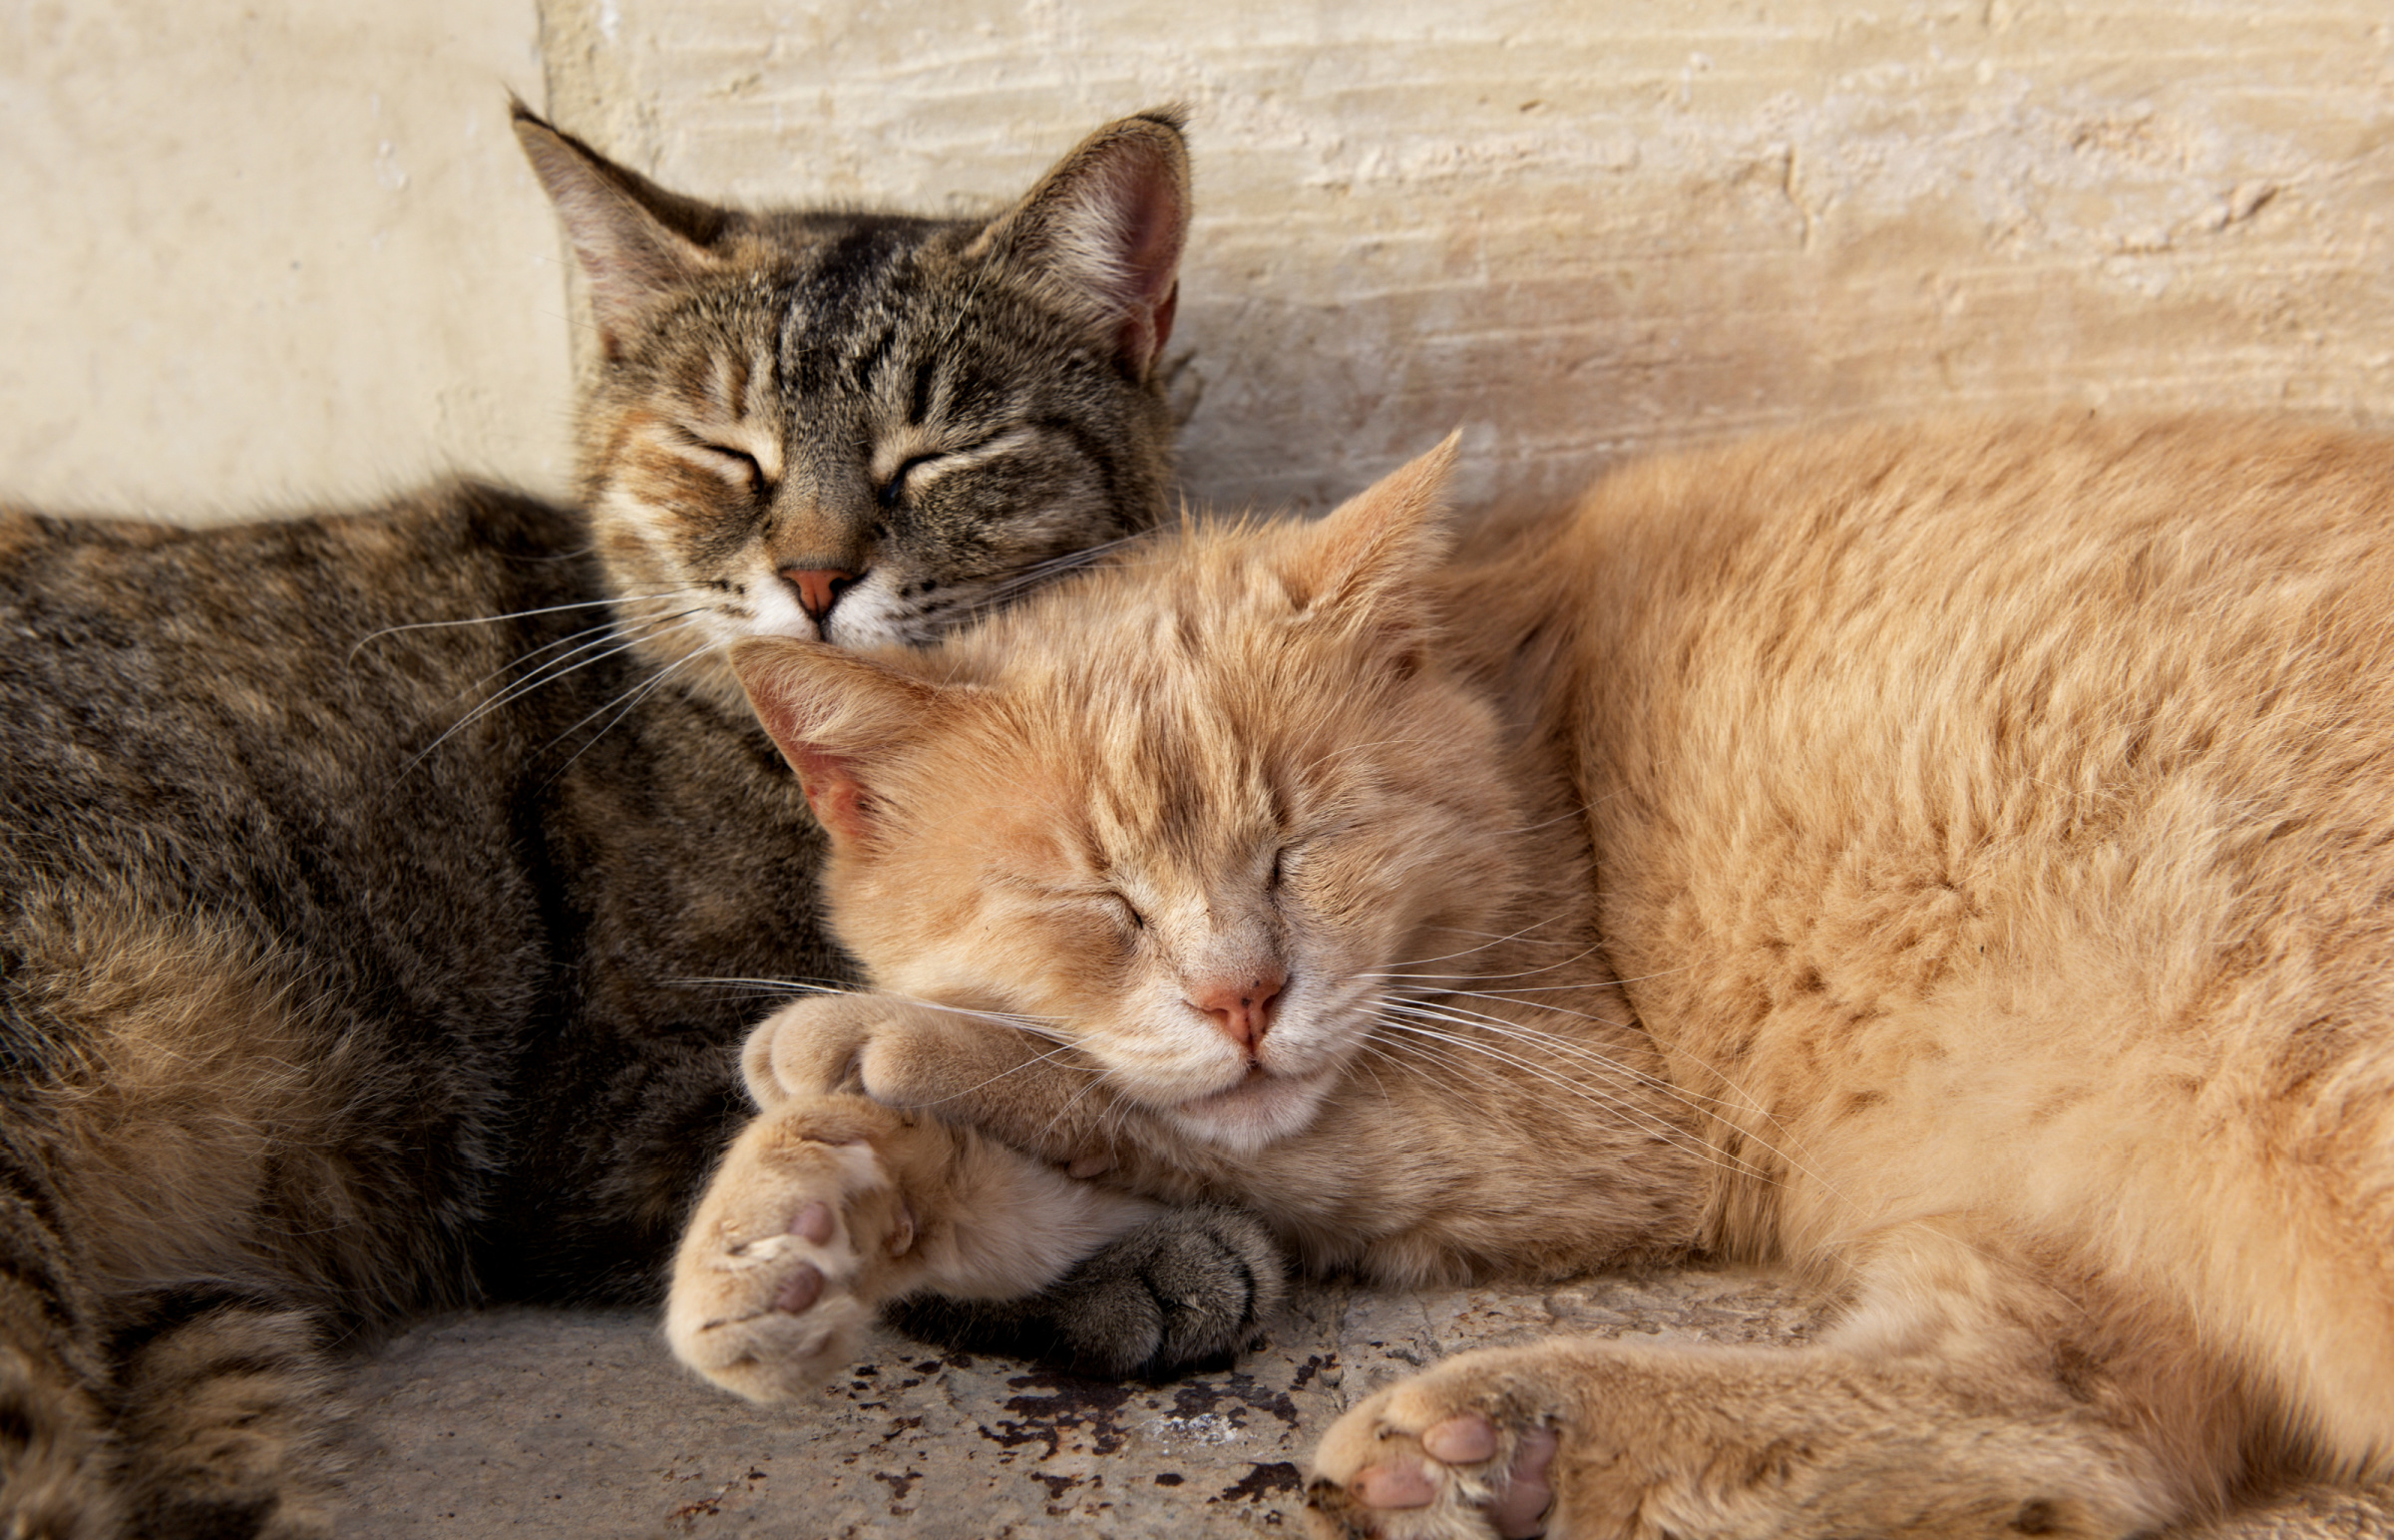 Research Shows Cats Know Companion Cats’ Names